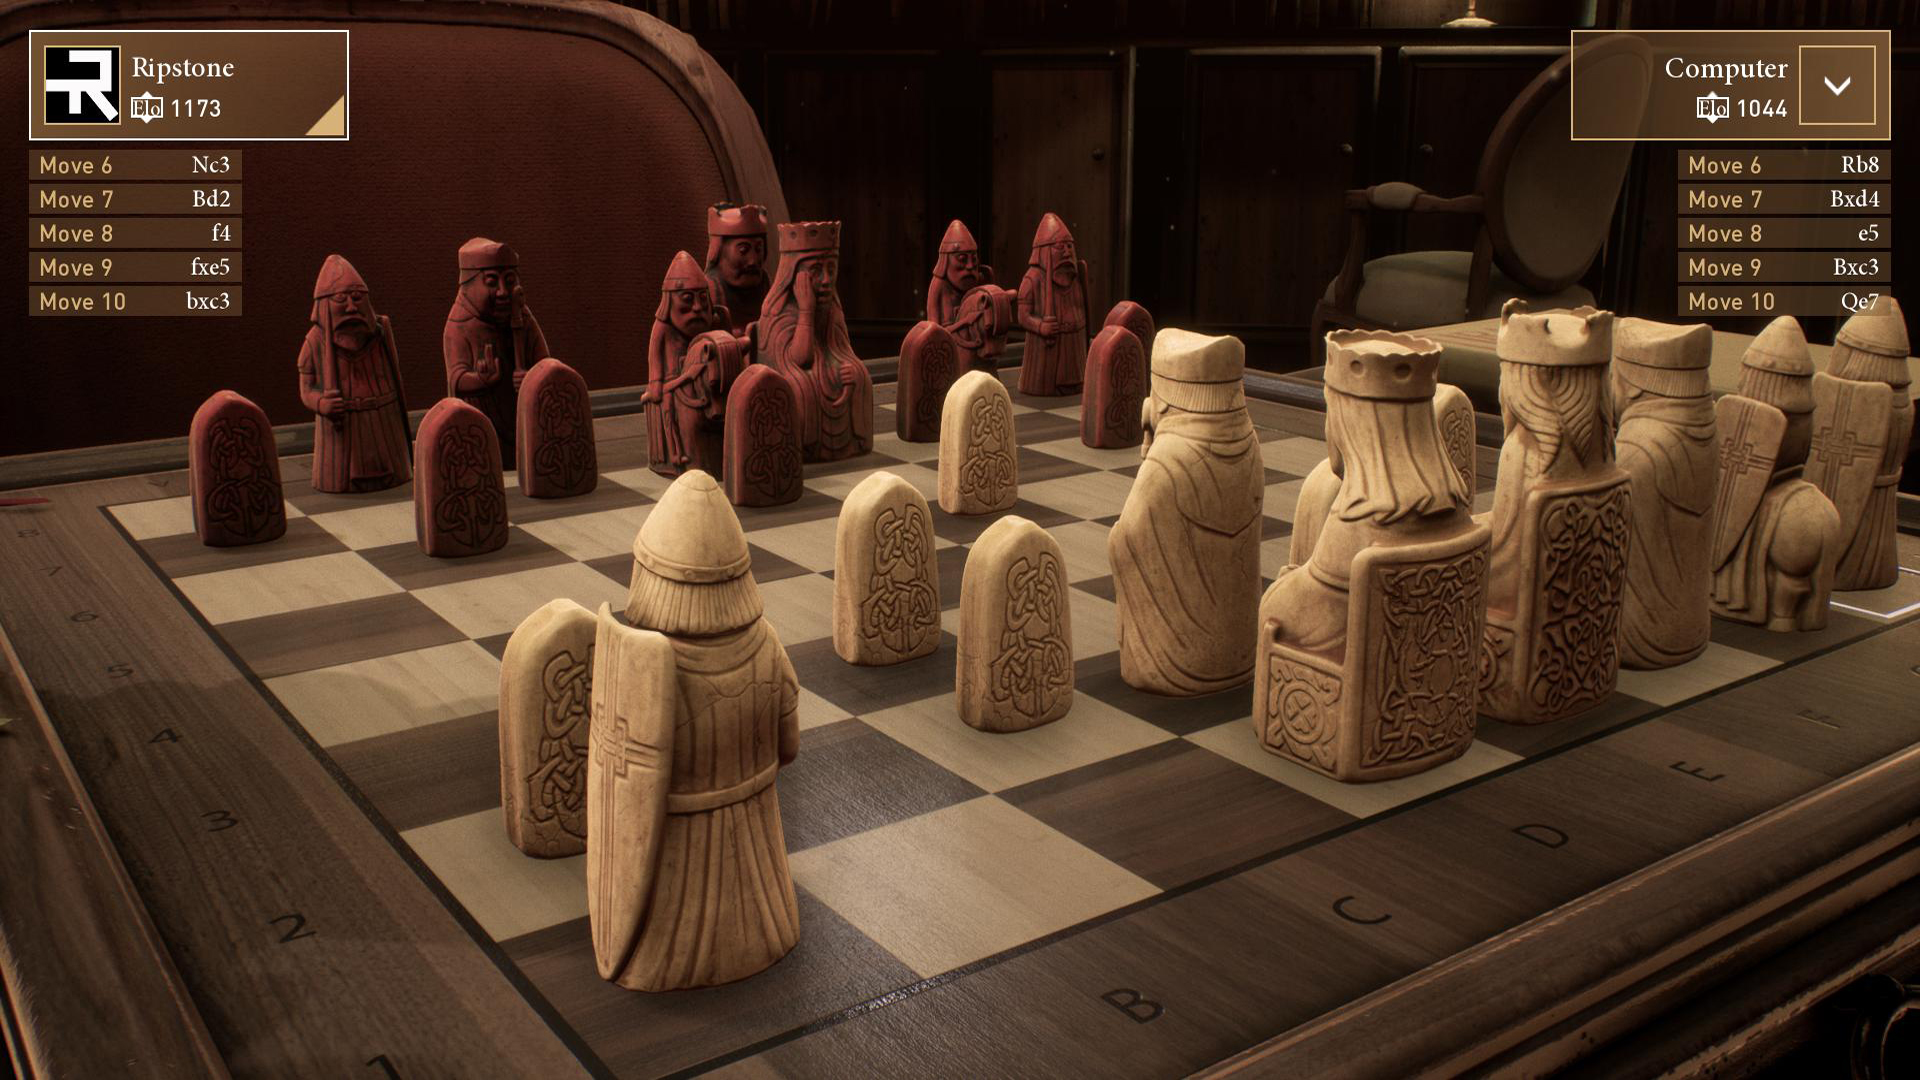 Chess Ultra Imperial chess set on Steam